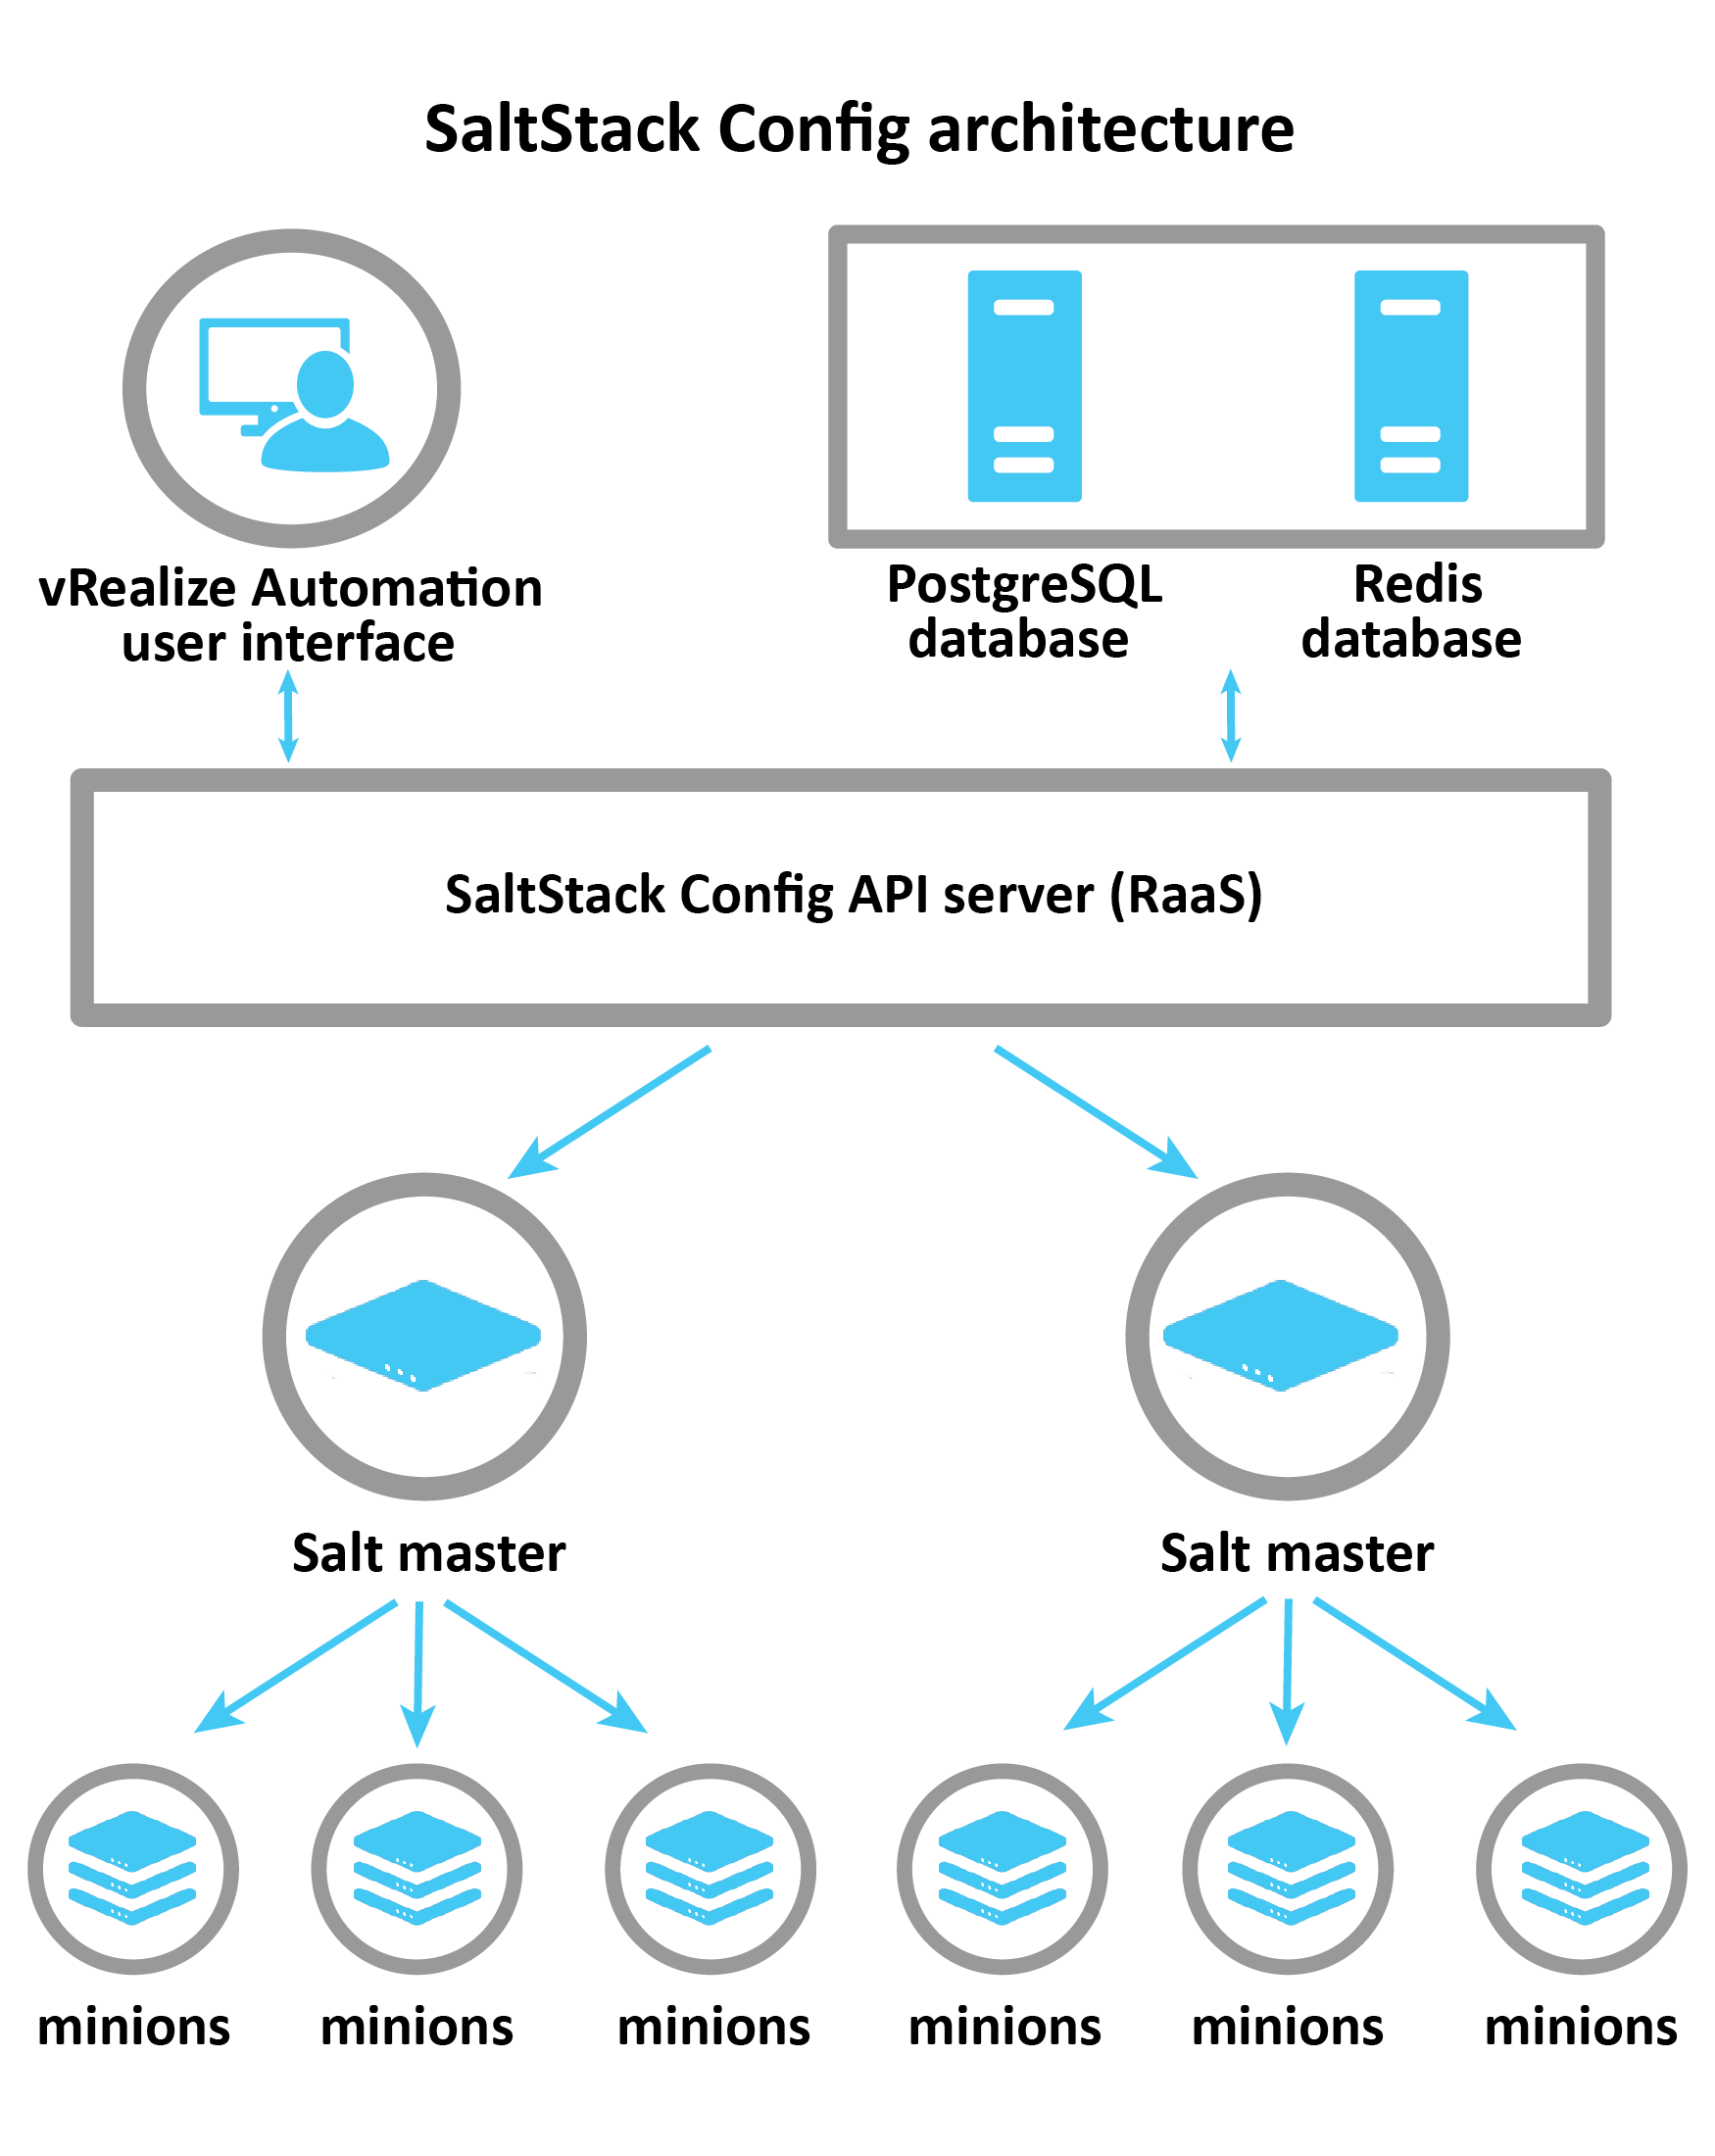 Diagram explaining SaltStack Config architecture: vRA, Postgress and Redis connect to the RaaS server, which controls the Salt Masters. The Salt Masters then pass information to individual minions.